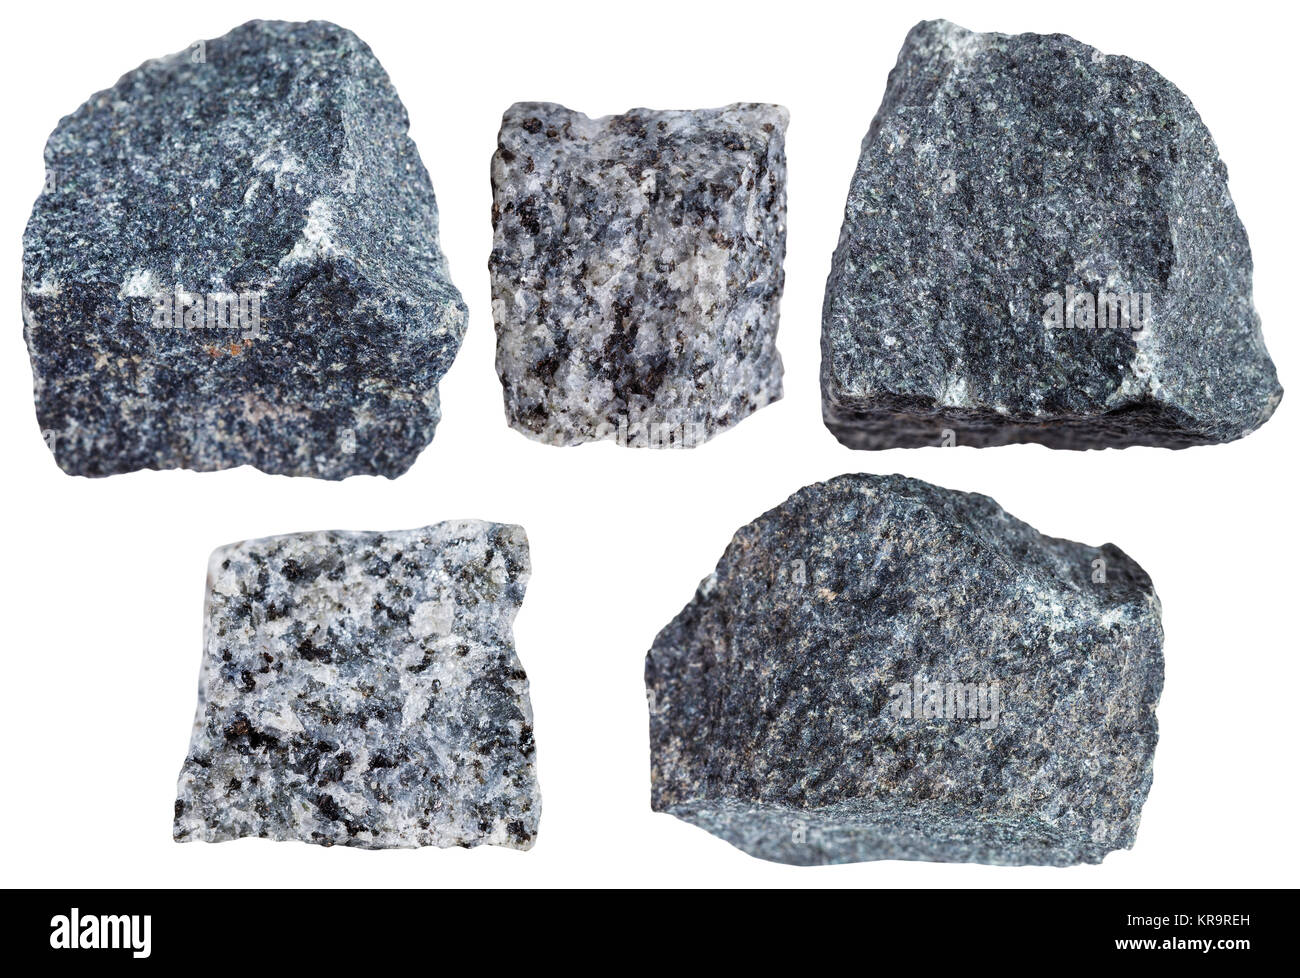 collection from specimens of Gabbro rock Stock Photo